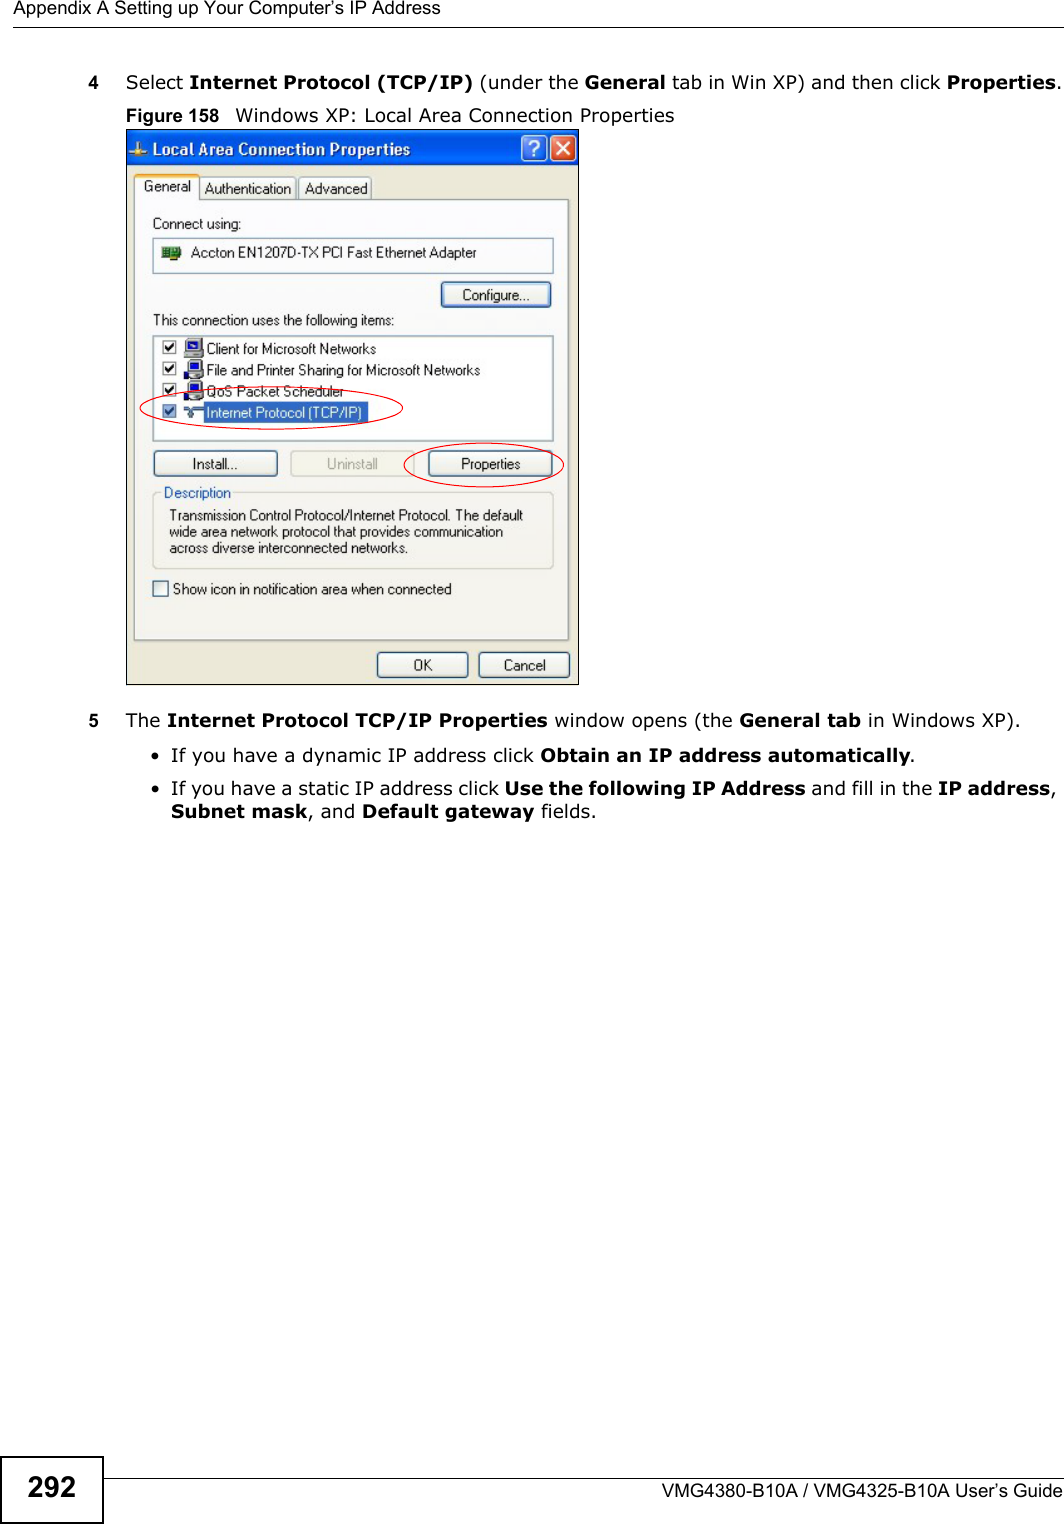 Appendix A Setting up Your Computer’s IP AddressVMG4380-B10A / VMG4325-B10A User’s Guide2924Select Internet Protocol (TCP/IP) (under the General tab in Win XP) and then click Properties.Figure 158   Windows XP: Local Area Connection Properties5The Internet Protocol TCP/IP Properties window opens (the General tab in Windows XP).• If you have a dynamic IP address click Obtain an IP address automatically.• If you have a static IP address click Use the following IP Address and fill in the IP address, Subnet mask, and Default gateway fields.